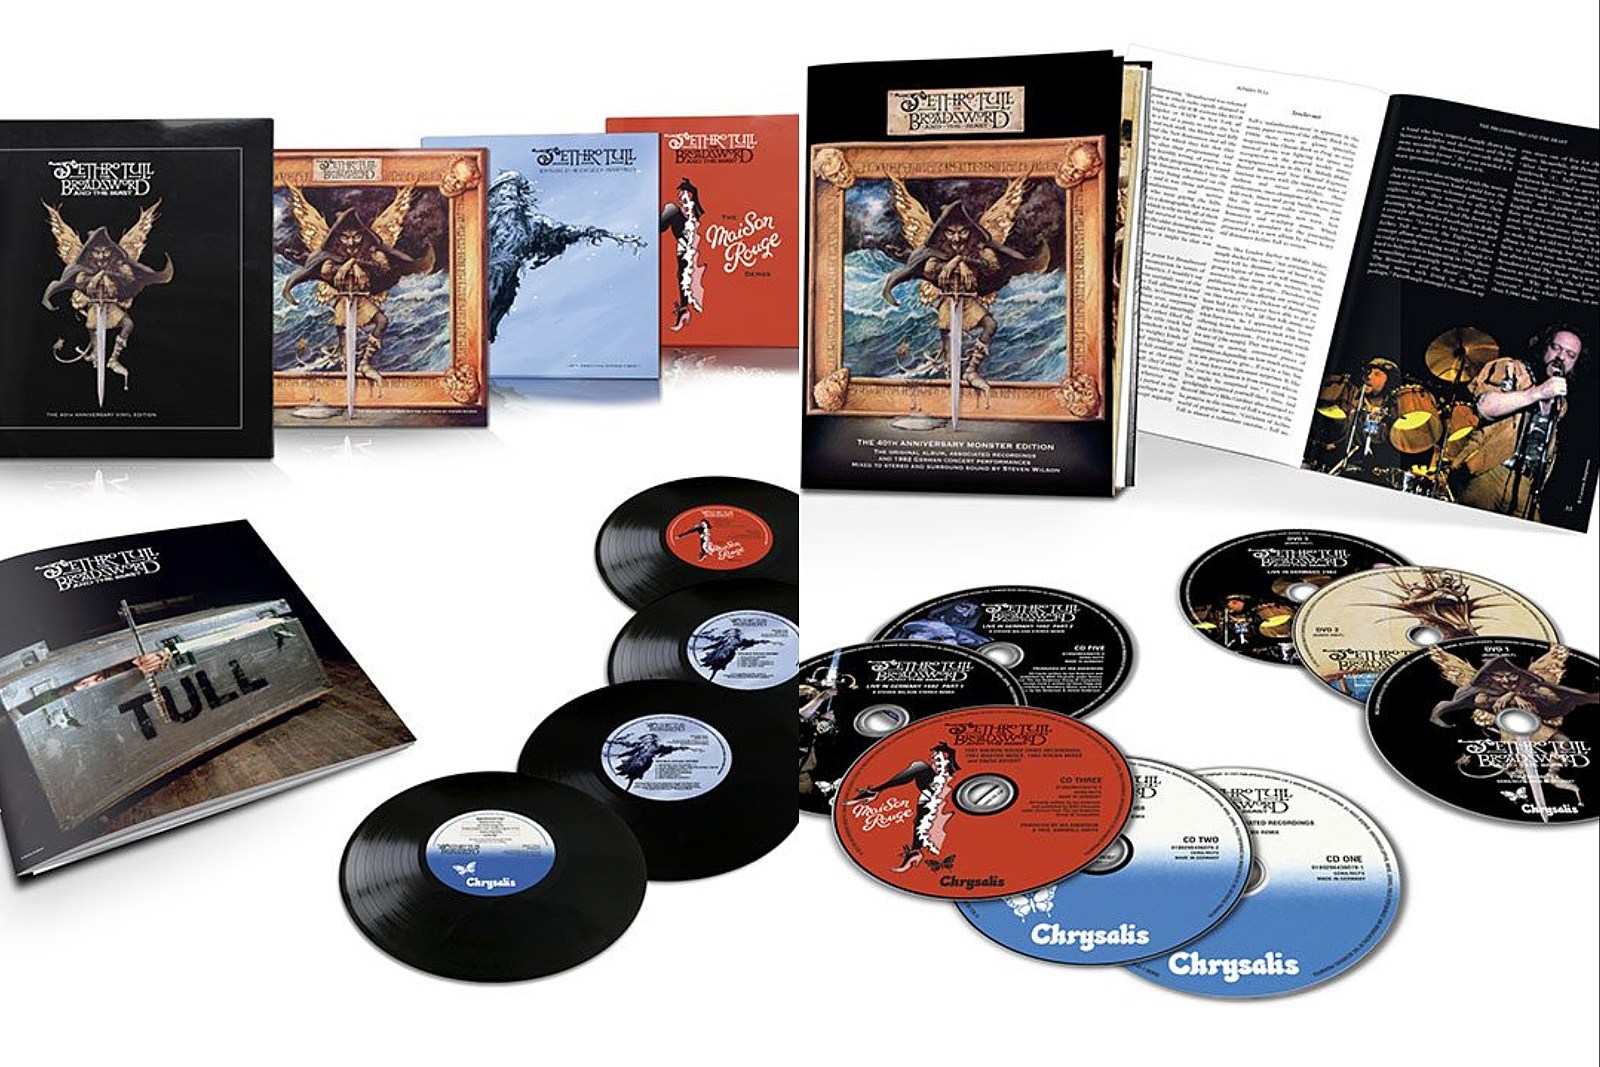 Jethro Tull Preps 'The Broadsword and the Beast' Deluxe Reissue